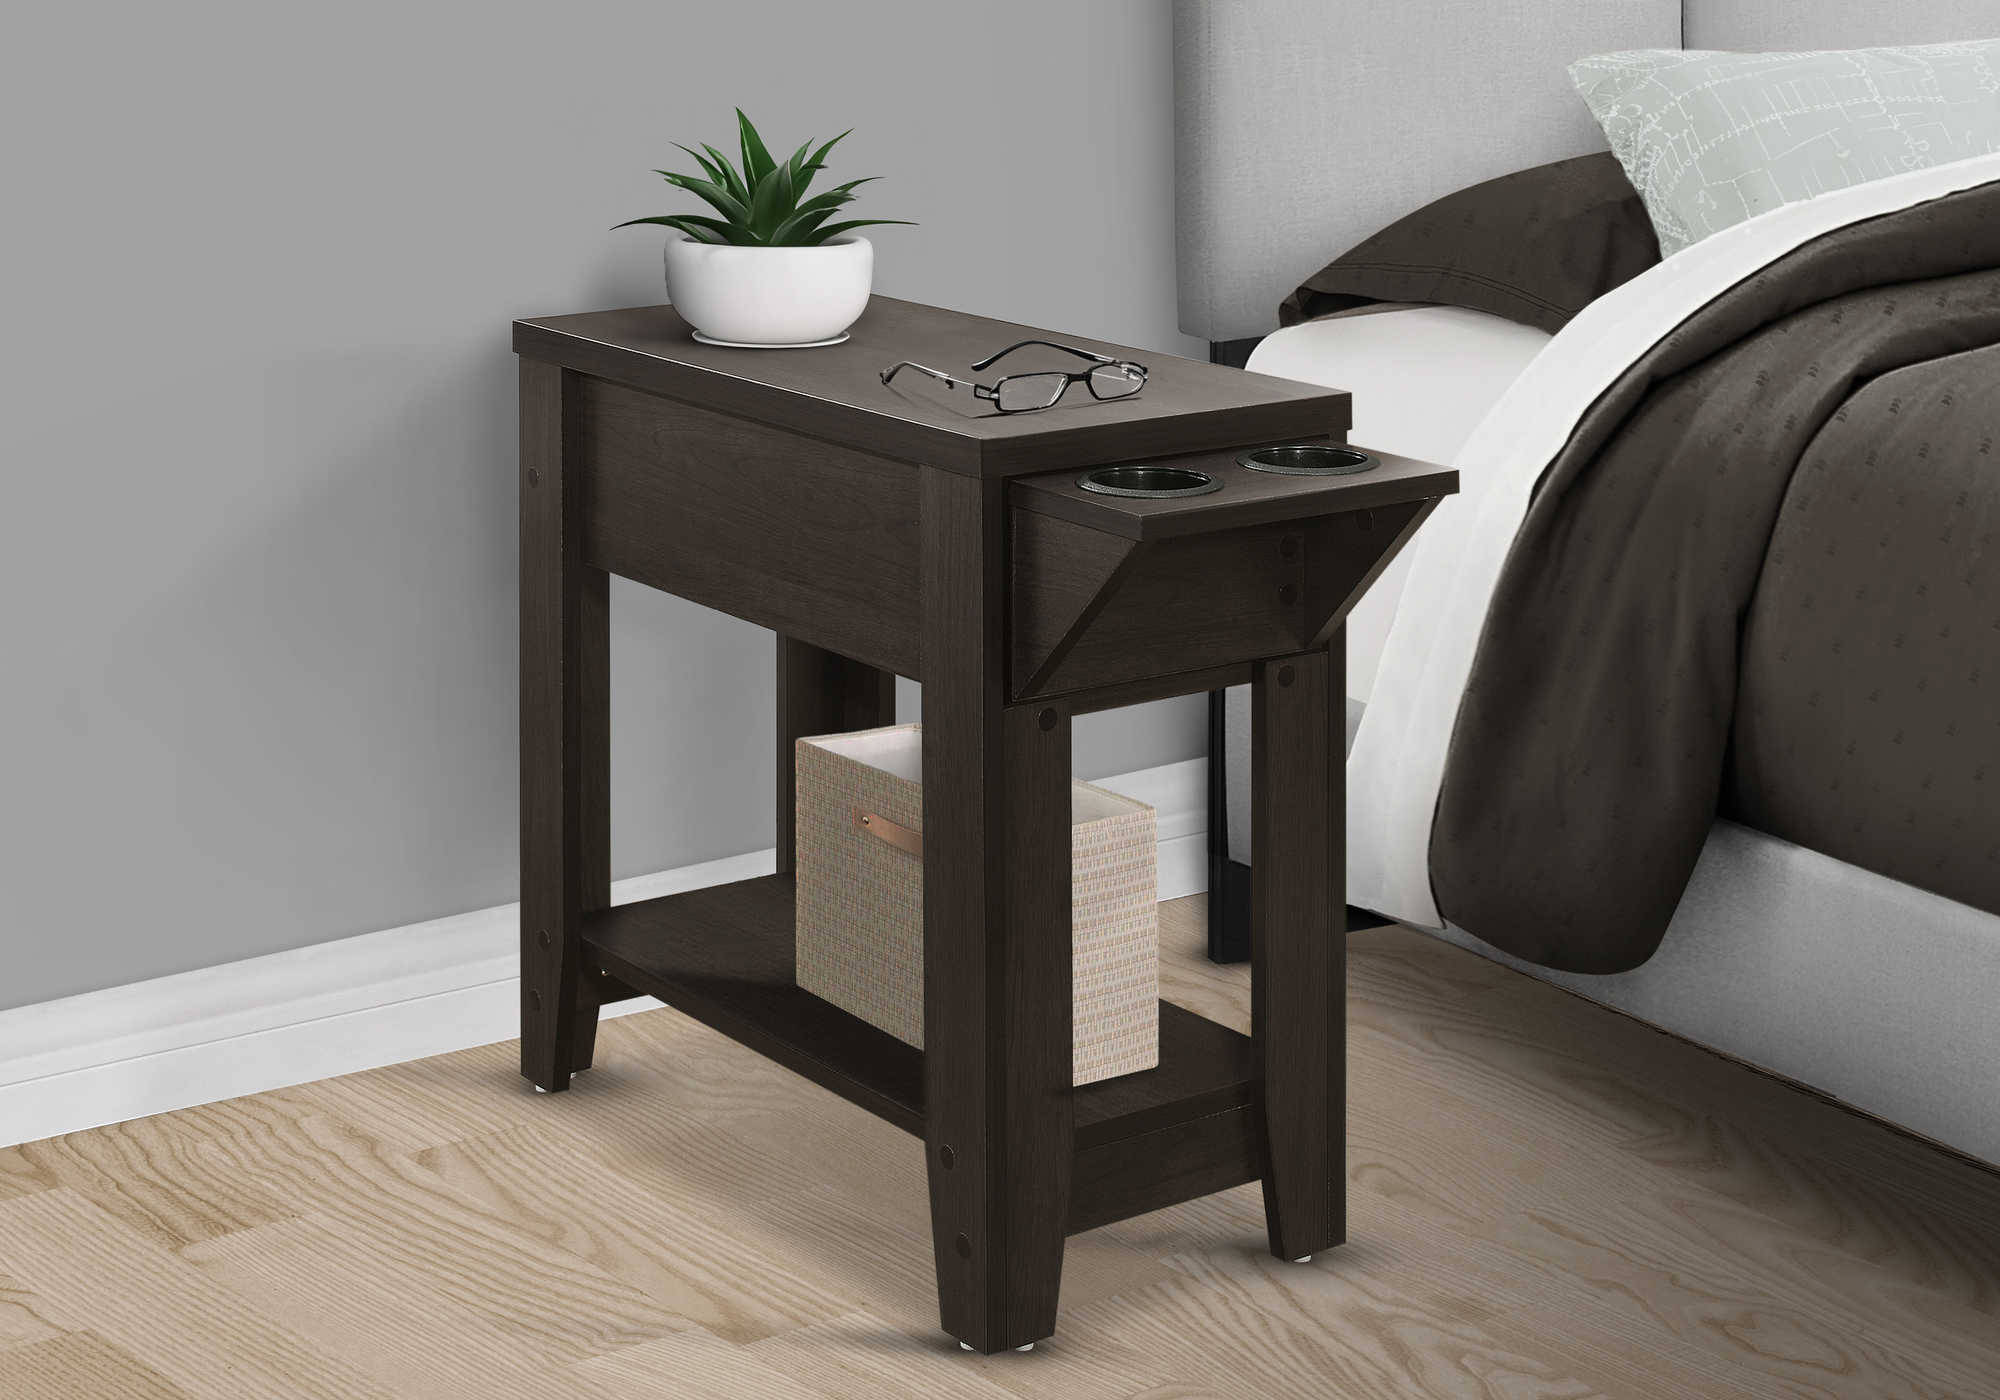 nightstand - 23"h / espresso with a glass holder i3197